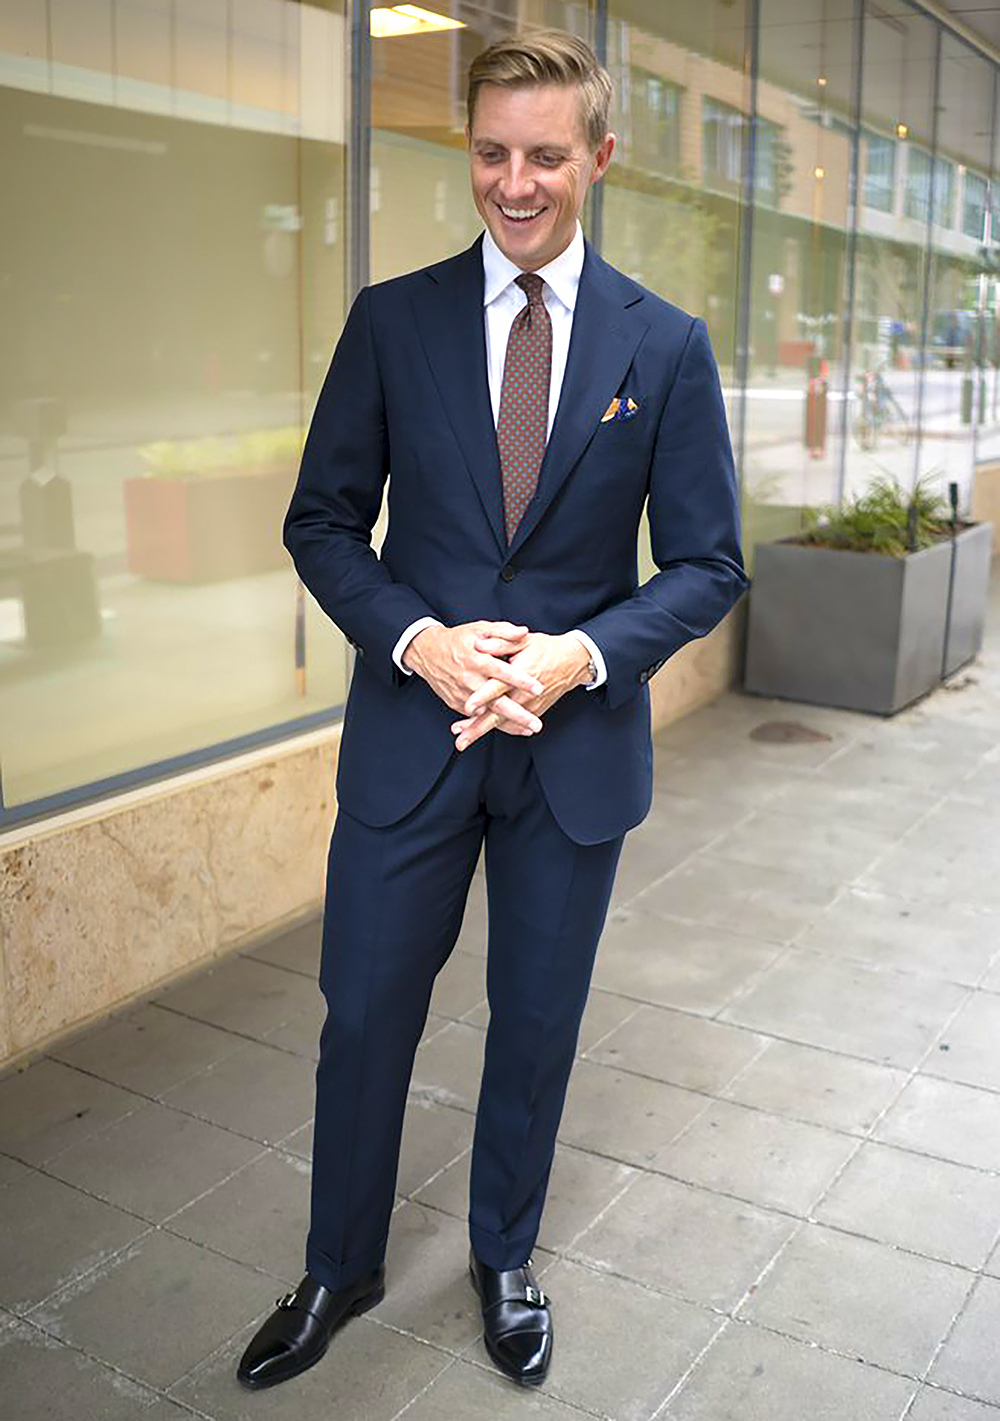 How to Wear a Blue Suit: Mastering the Look - Suits Expert